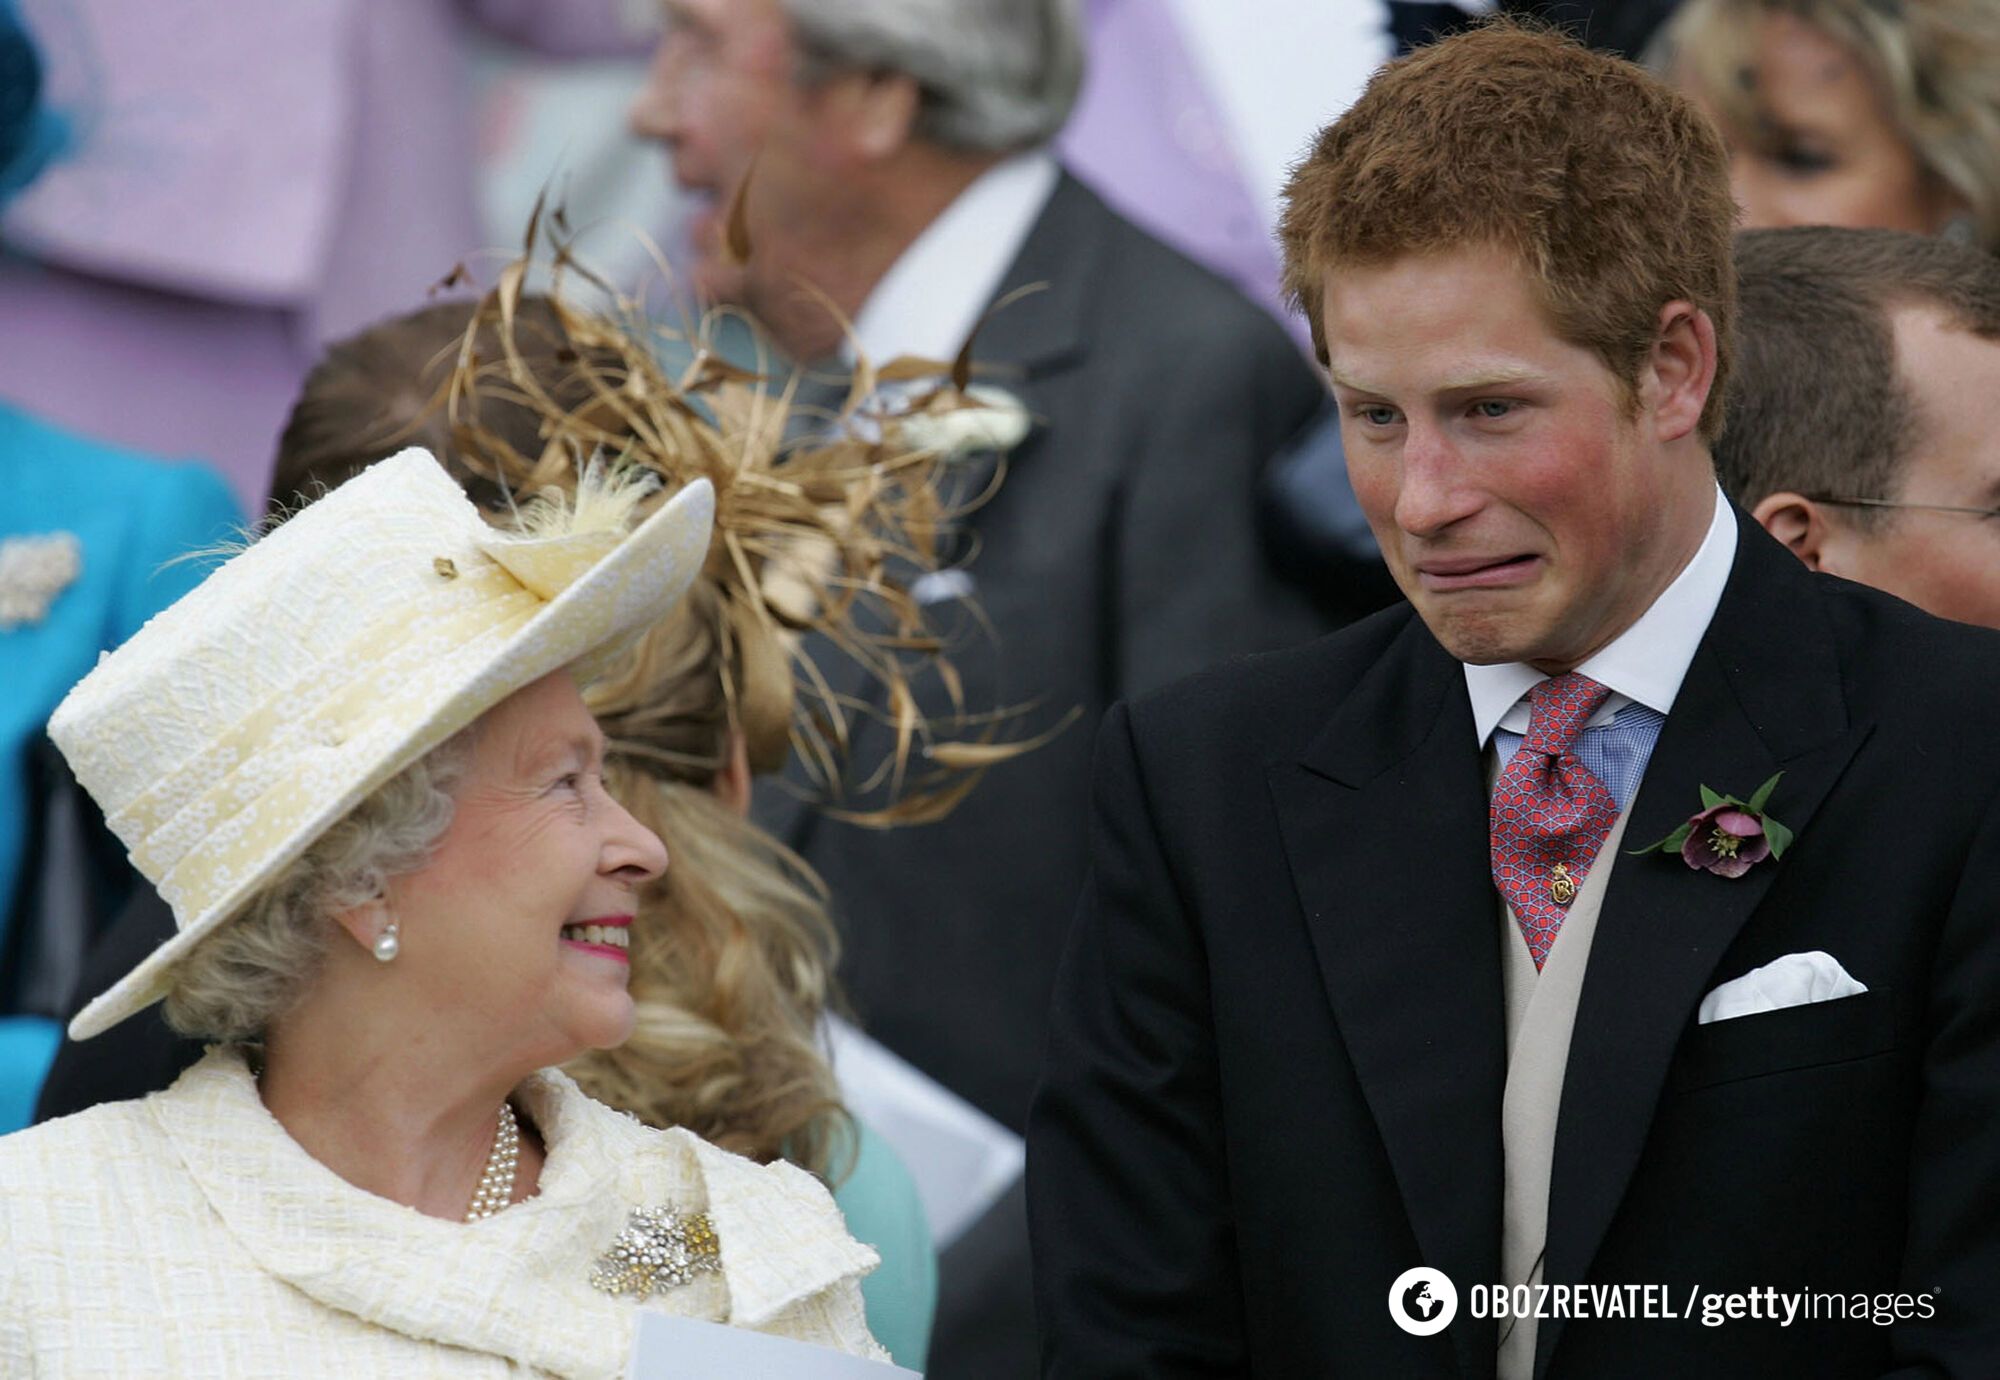 Prince Harry shows his tongue and King Charles poses with Shrek. 20 funny photos of the royal family